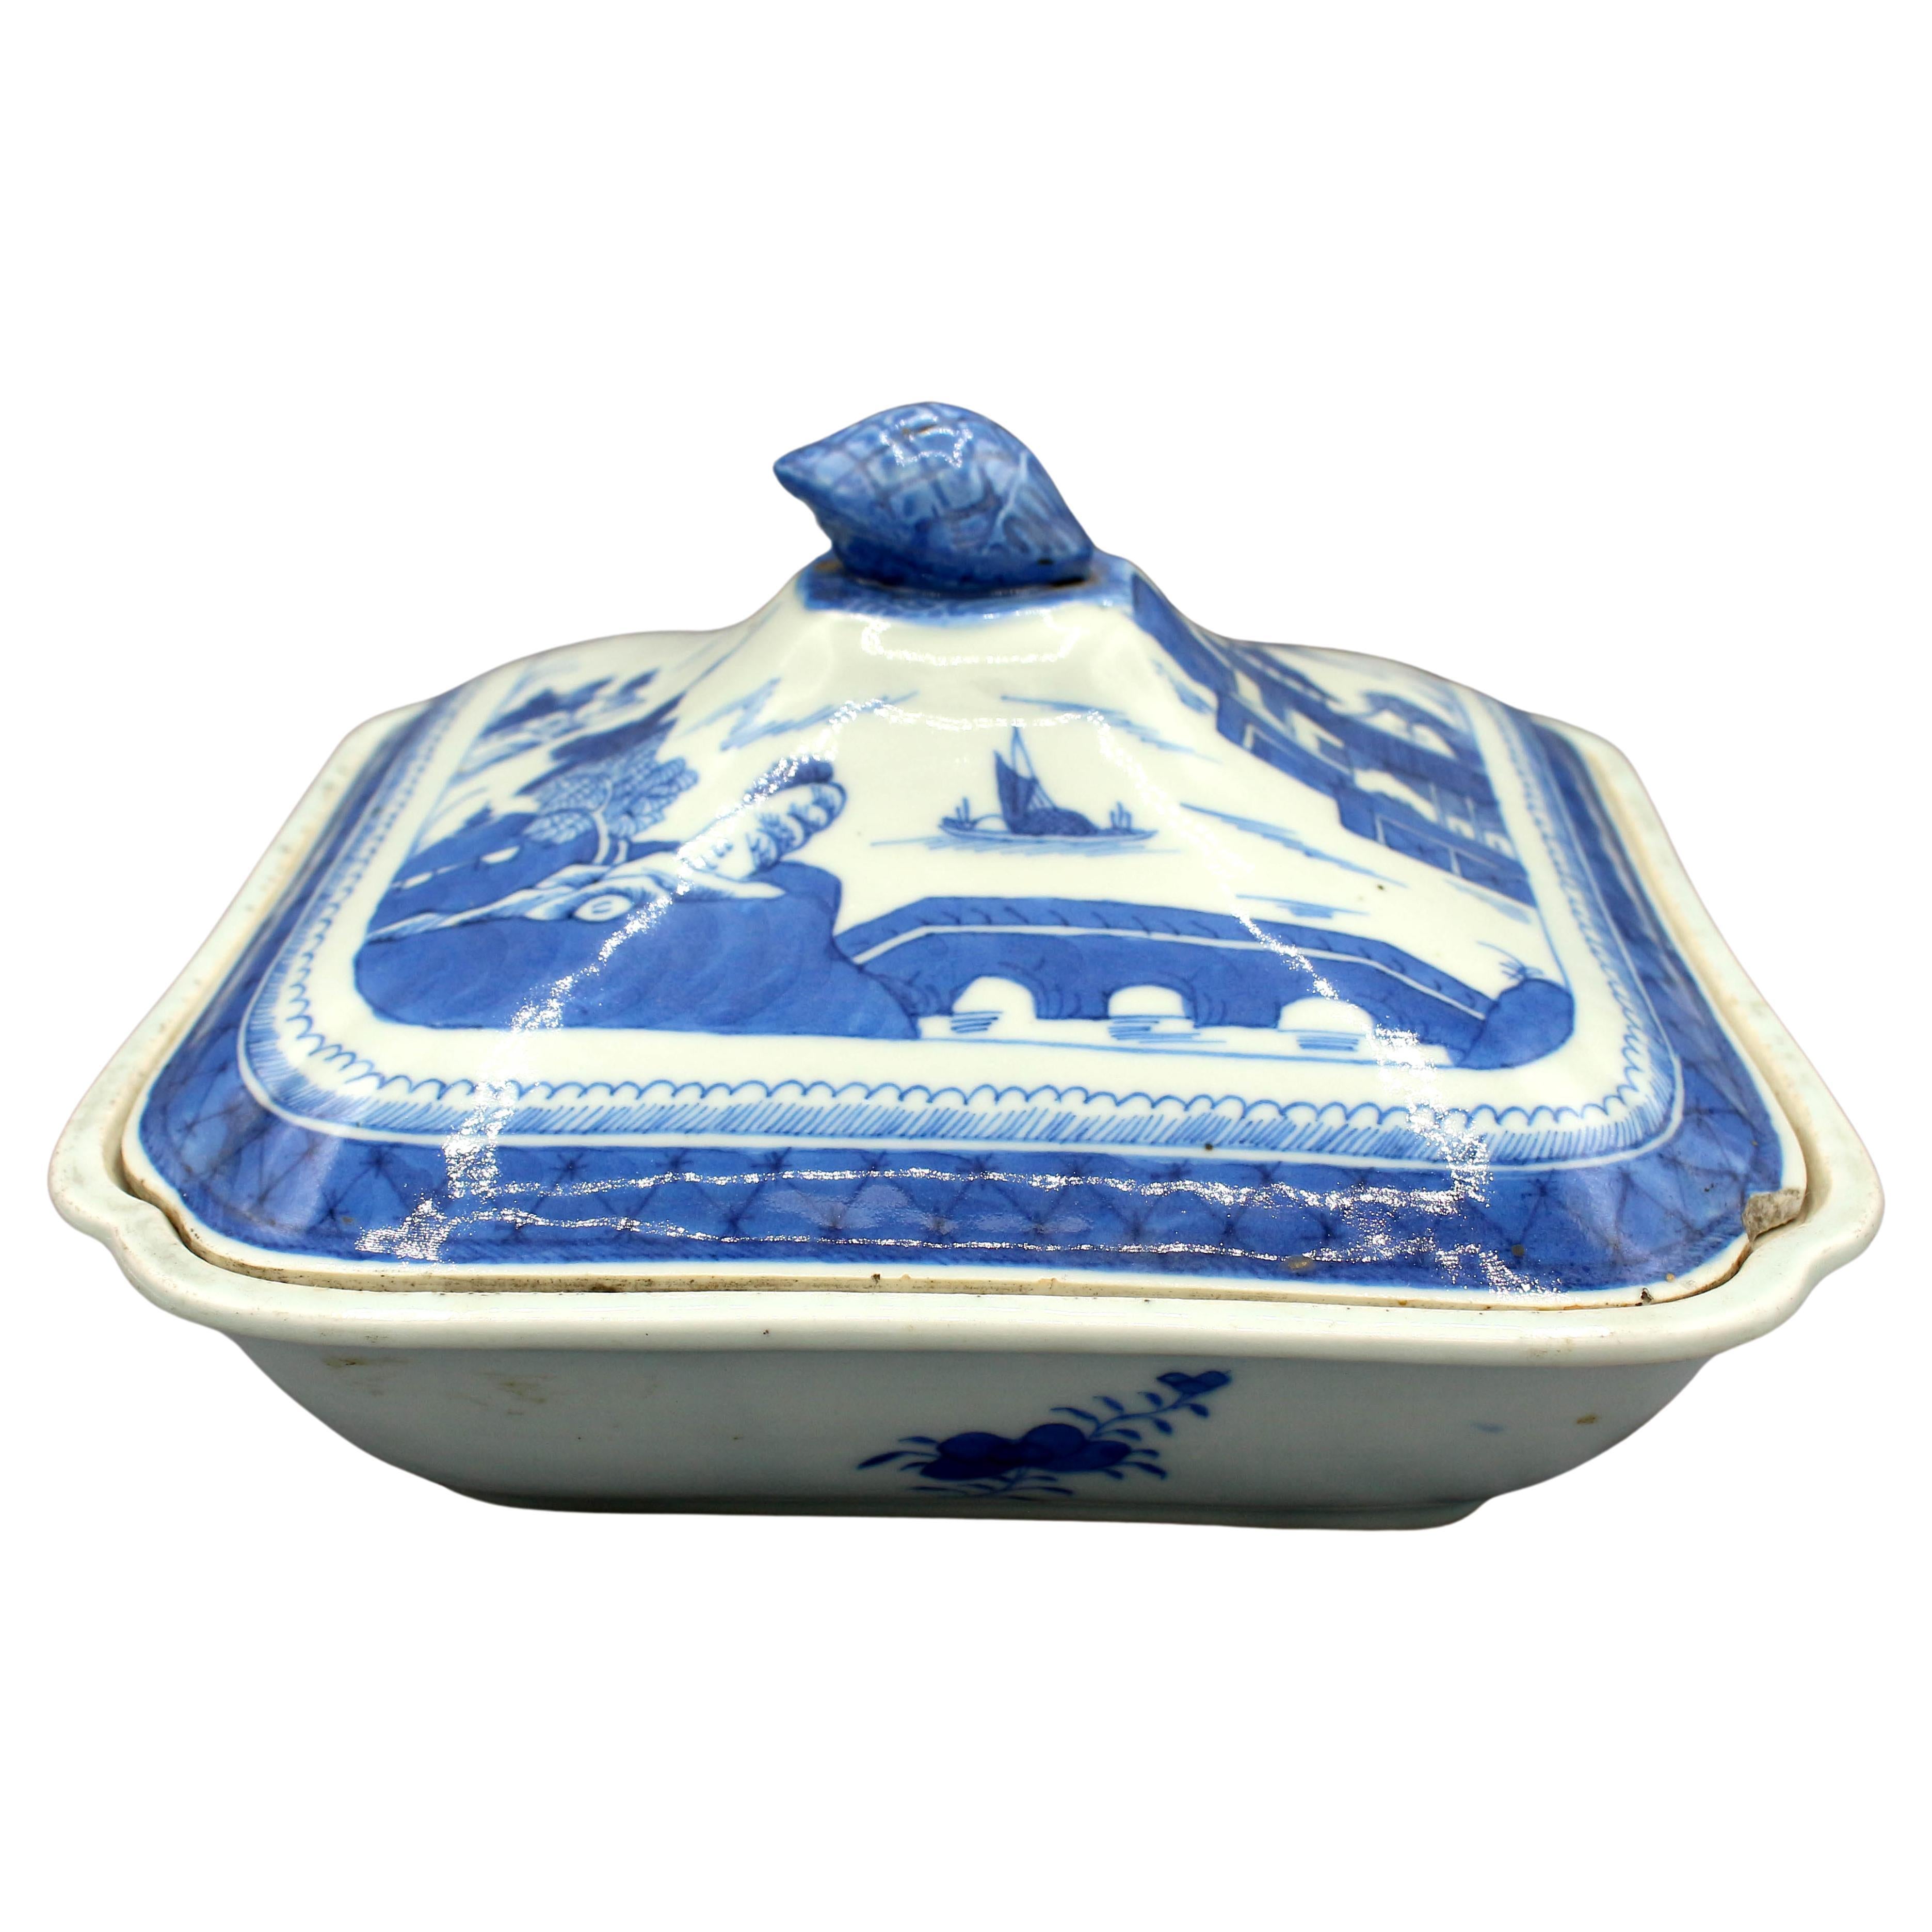 Circa 1830s Blue Canton Associated Covered Vegetable Dish, Chinese Export